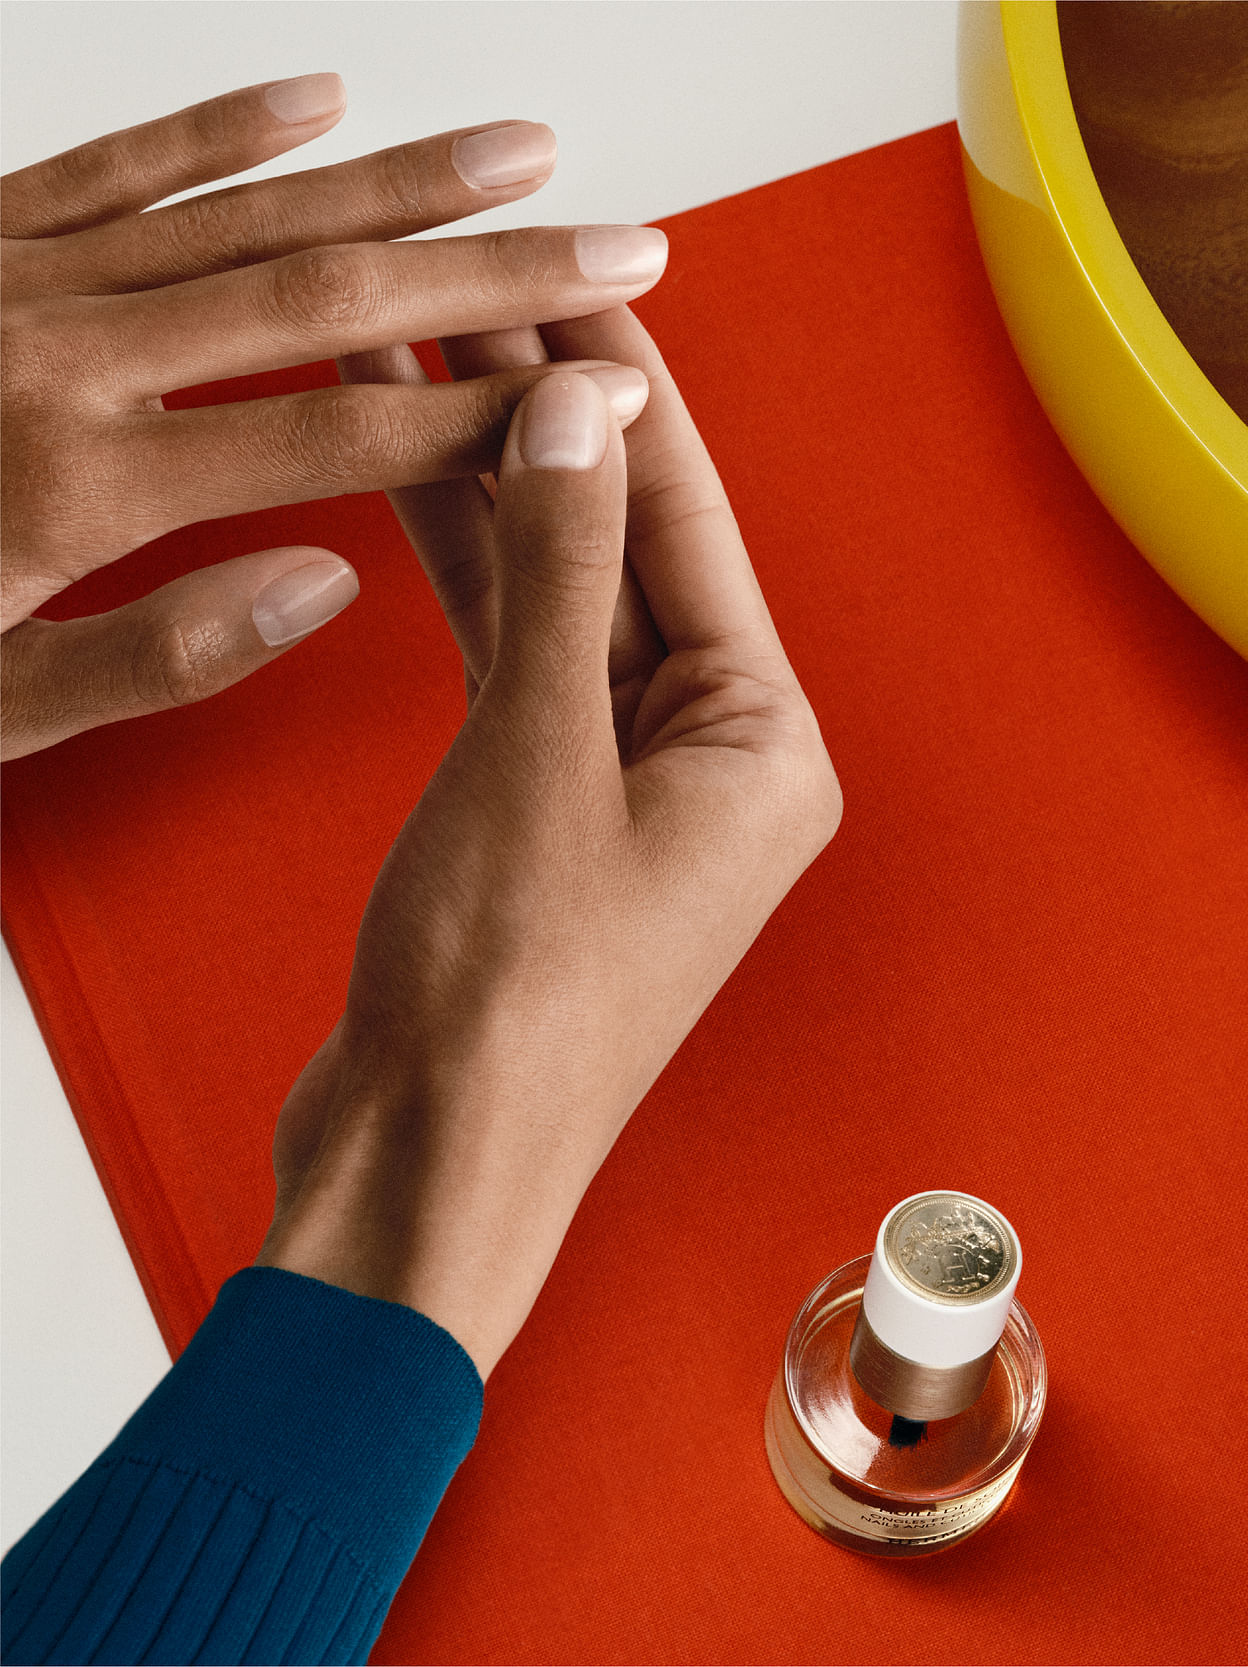 Les Mains Hermes Will Elevate Your Nail And Hand Care Routines